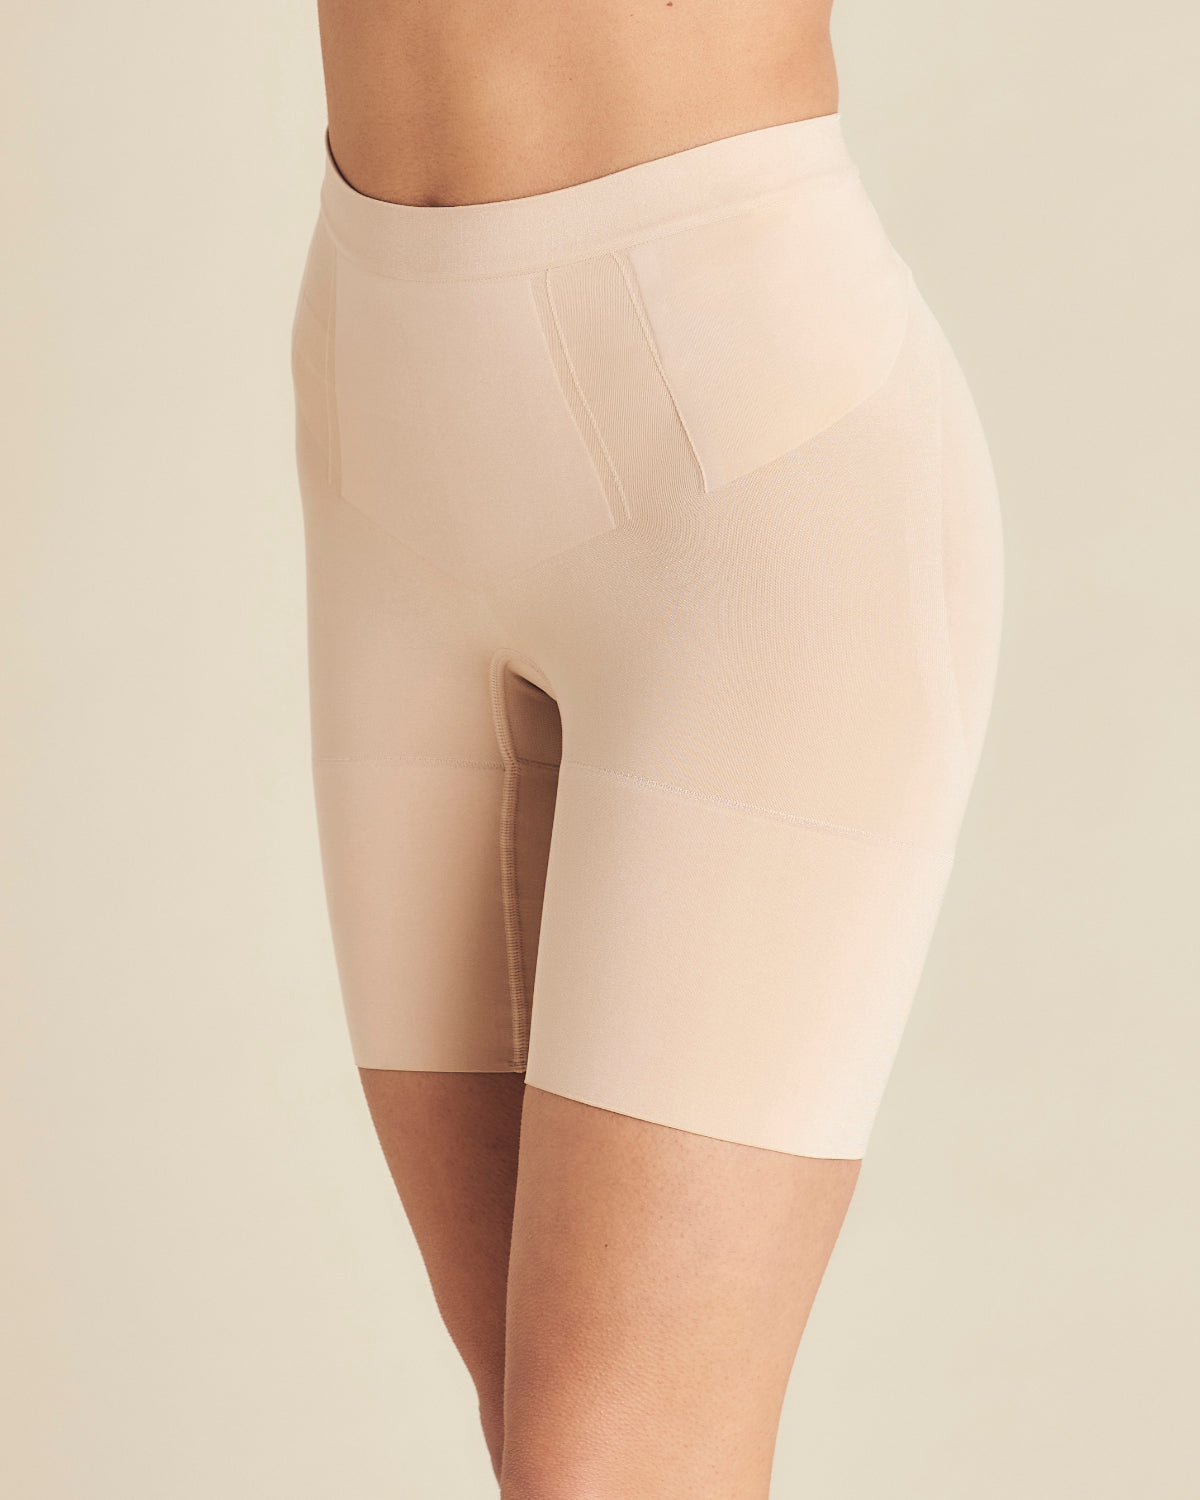 Nude Slimming Girdle by SPANX